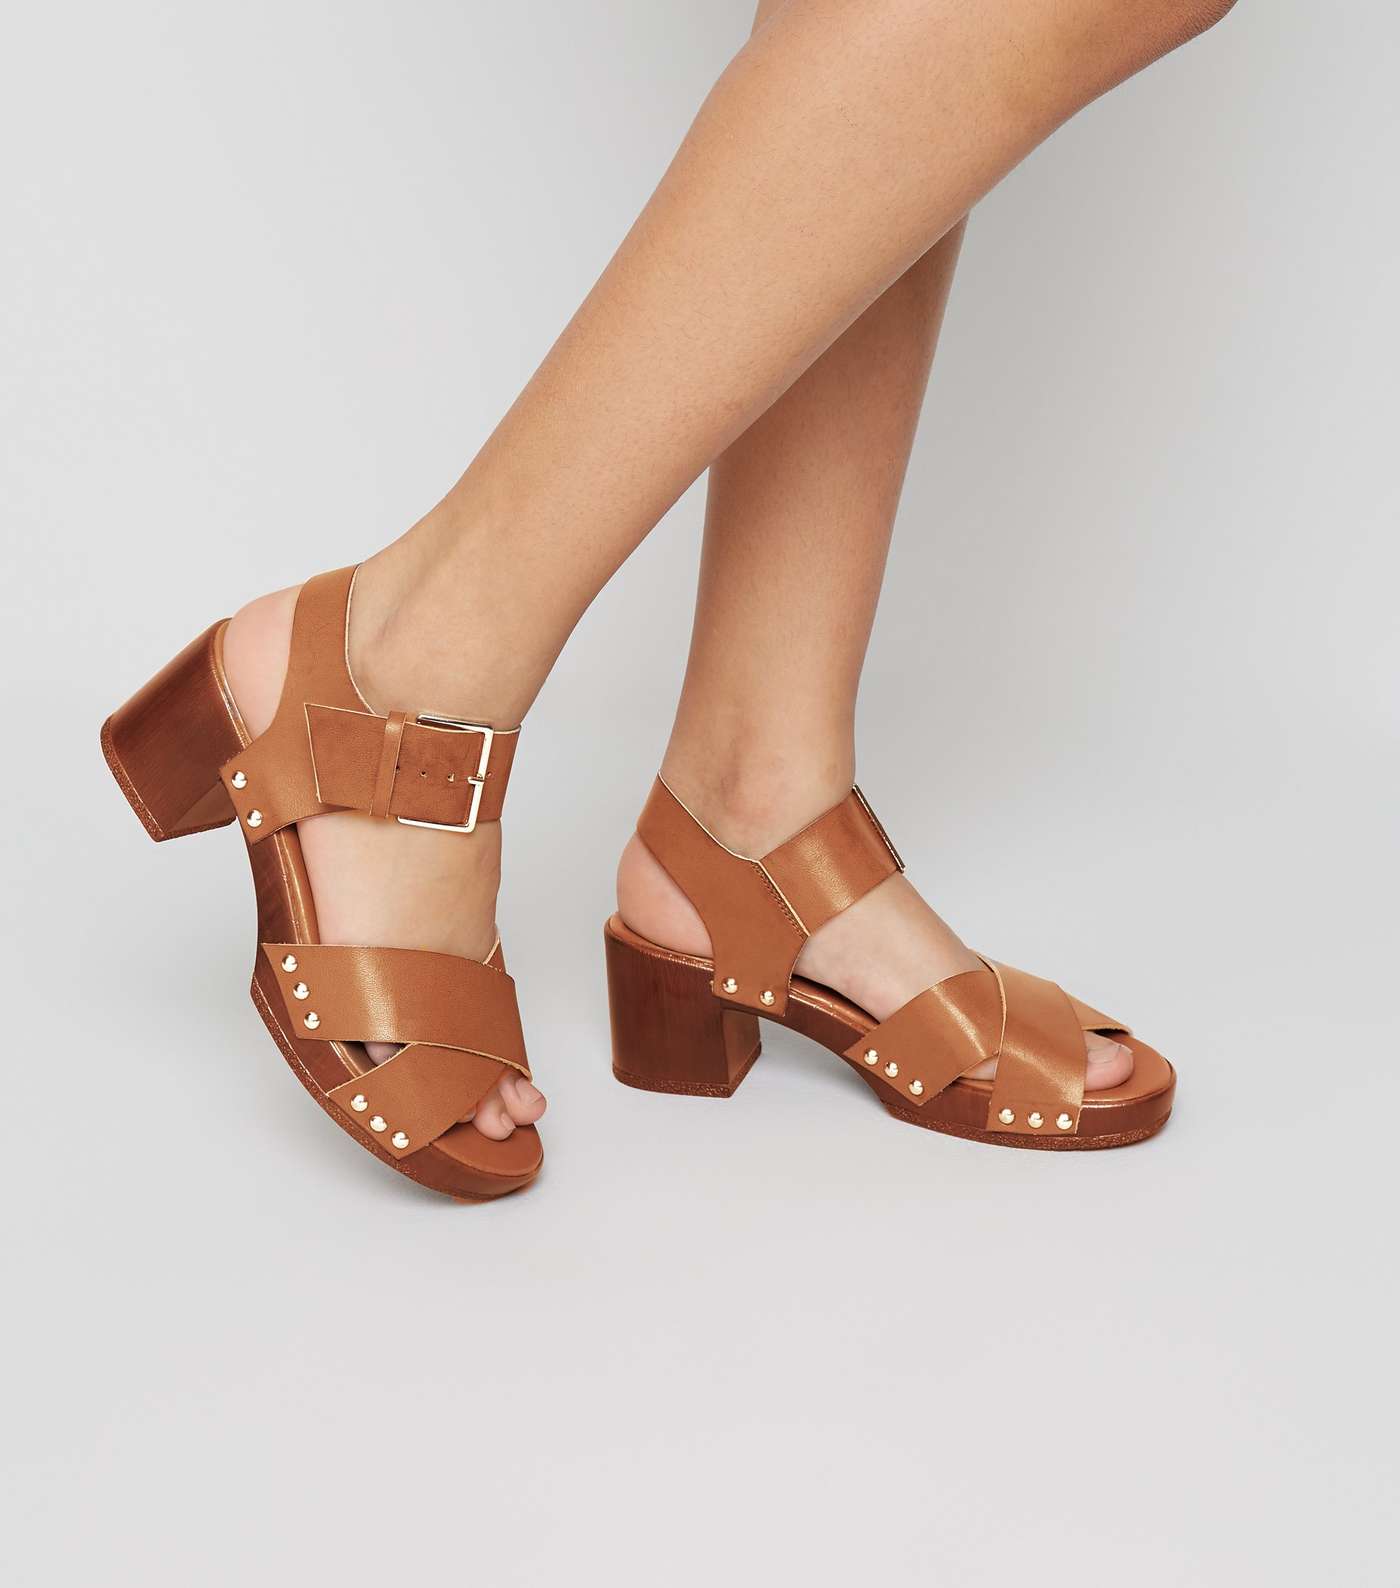 Girls Tan Wood Sole Chunky Sandals Image 2